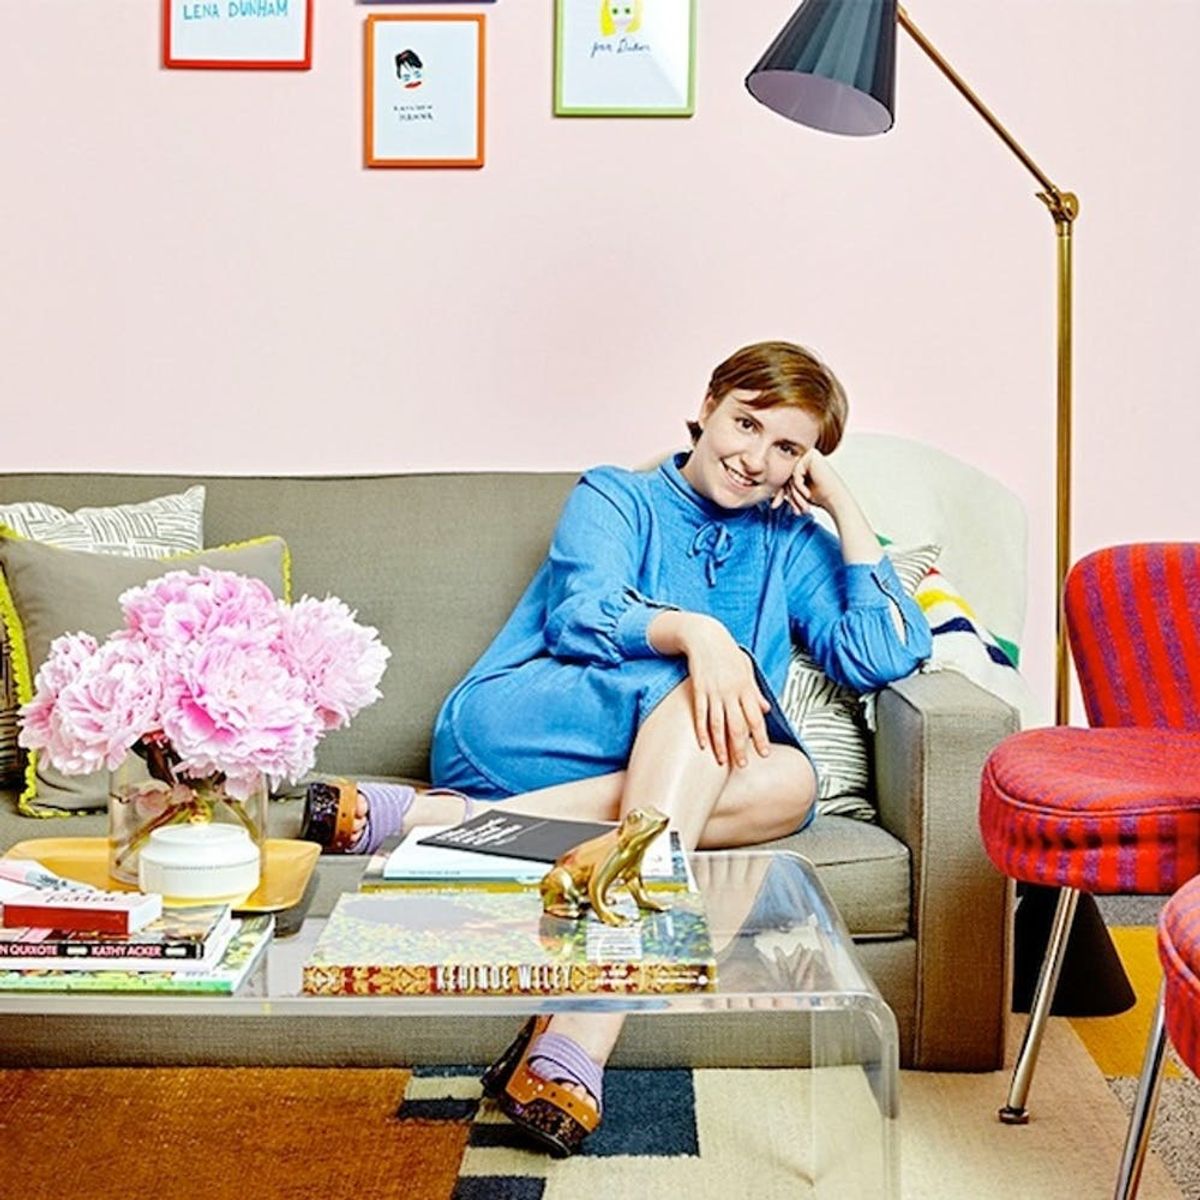 Lena Dunham’s Dressing Room Is Full of DIYs You’ll Want to Hack